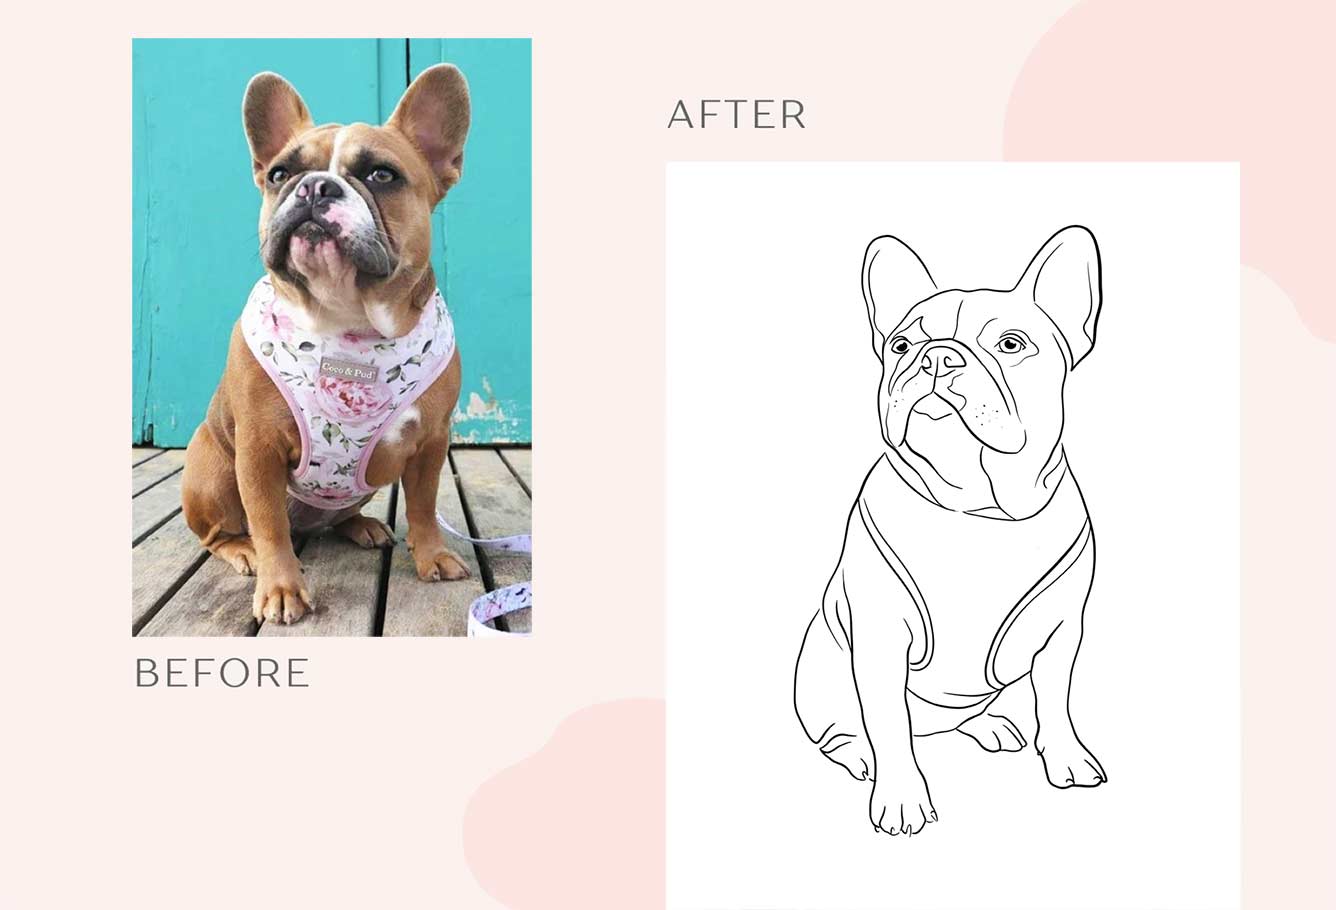 Custom pet portrait painting transformation. Before and after. Illustration from photo comparison.